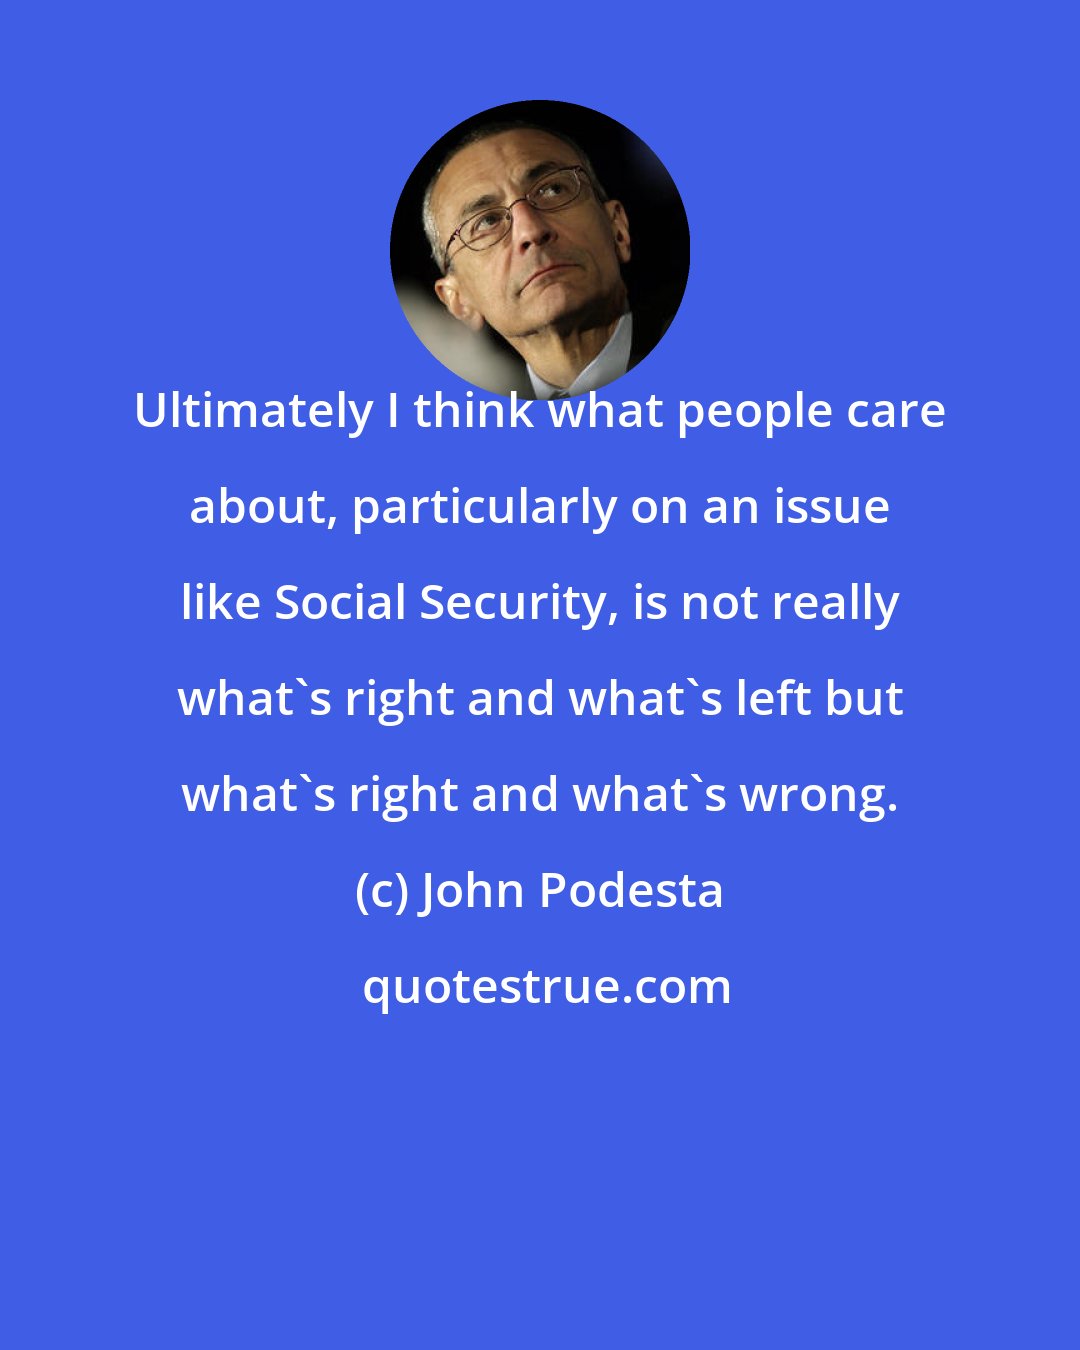 John Podesta: Ultimately I think what people care about, particularly on an issue like Social Security, is not really what's right and what's left but what's right and what's wrong.